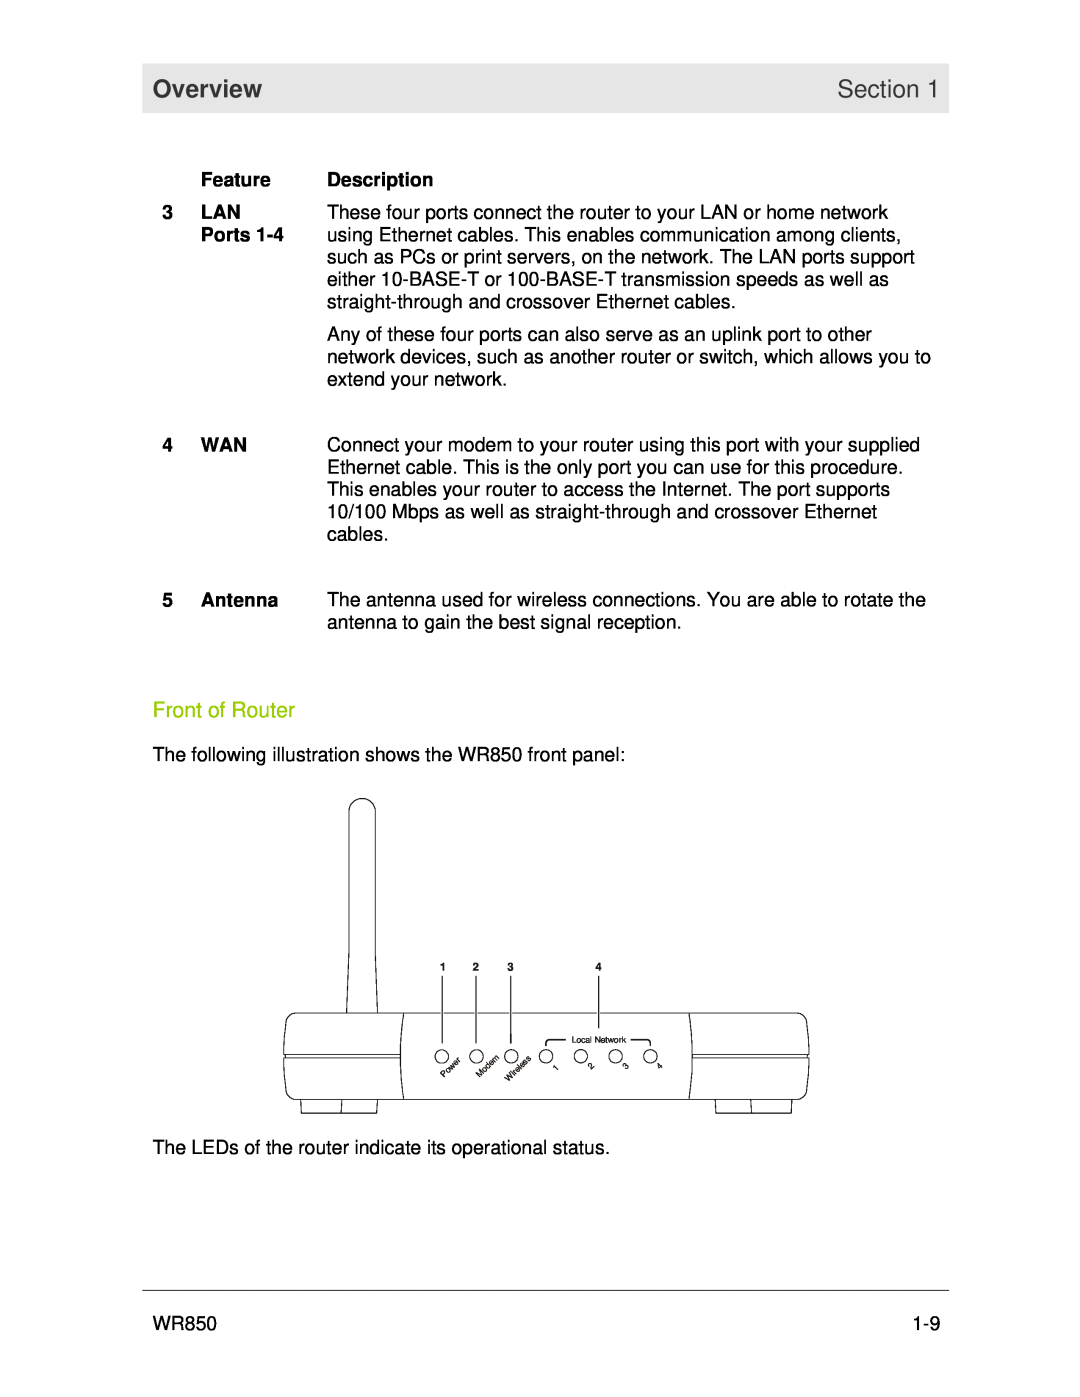 Motorola WR850 manual Front of Router, Overview, Section, Local Network 